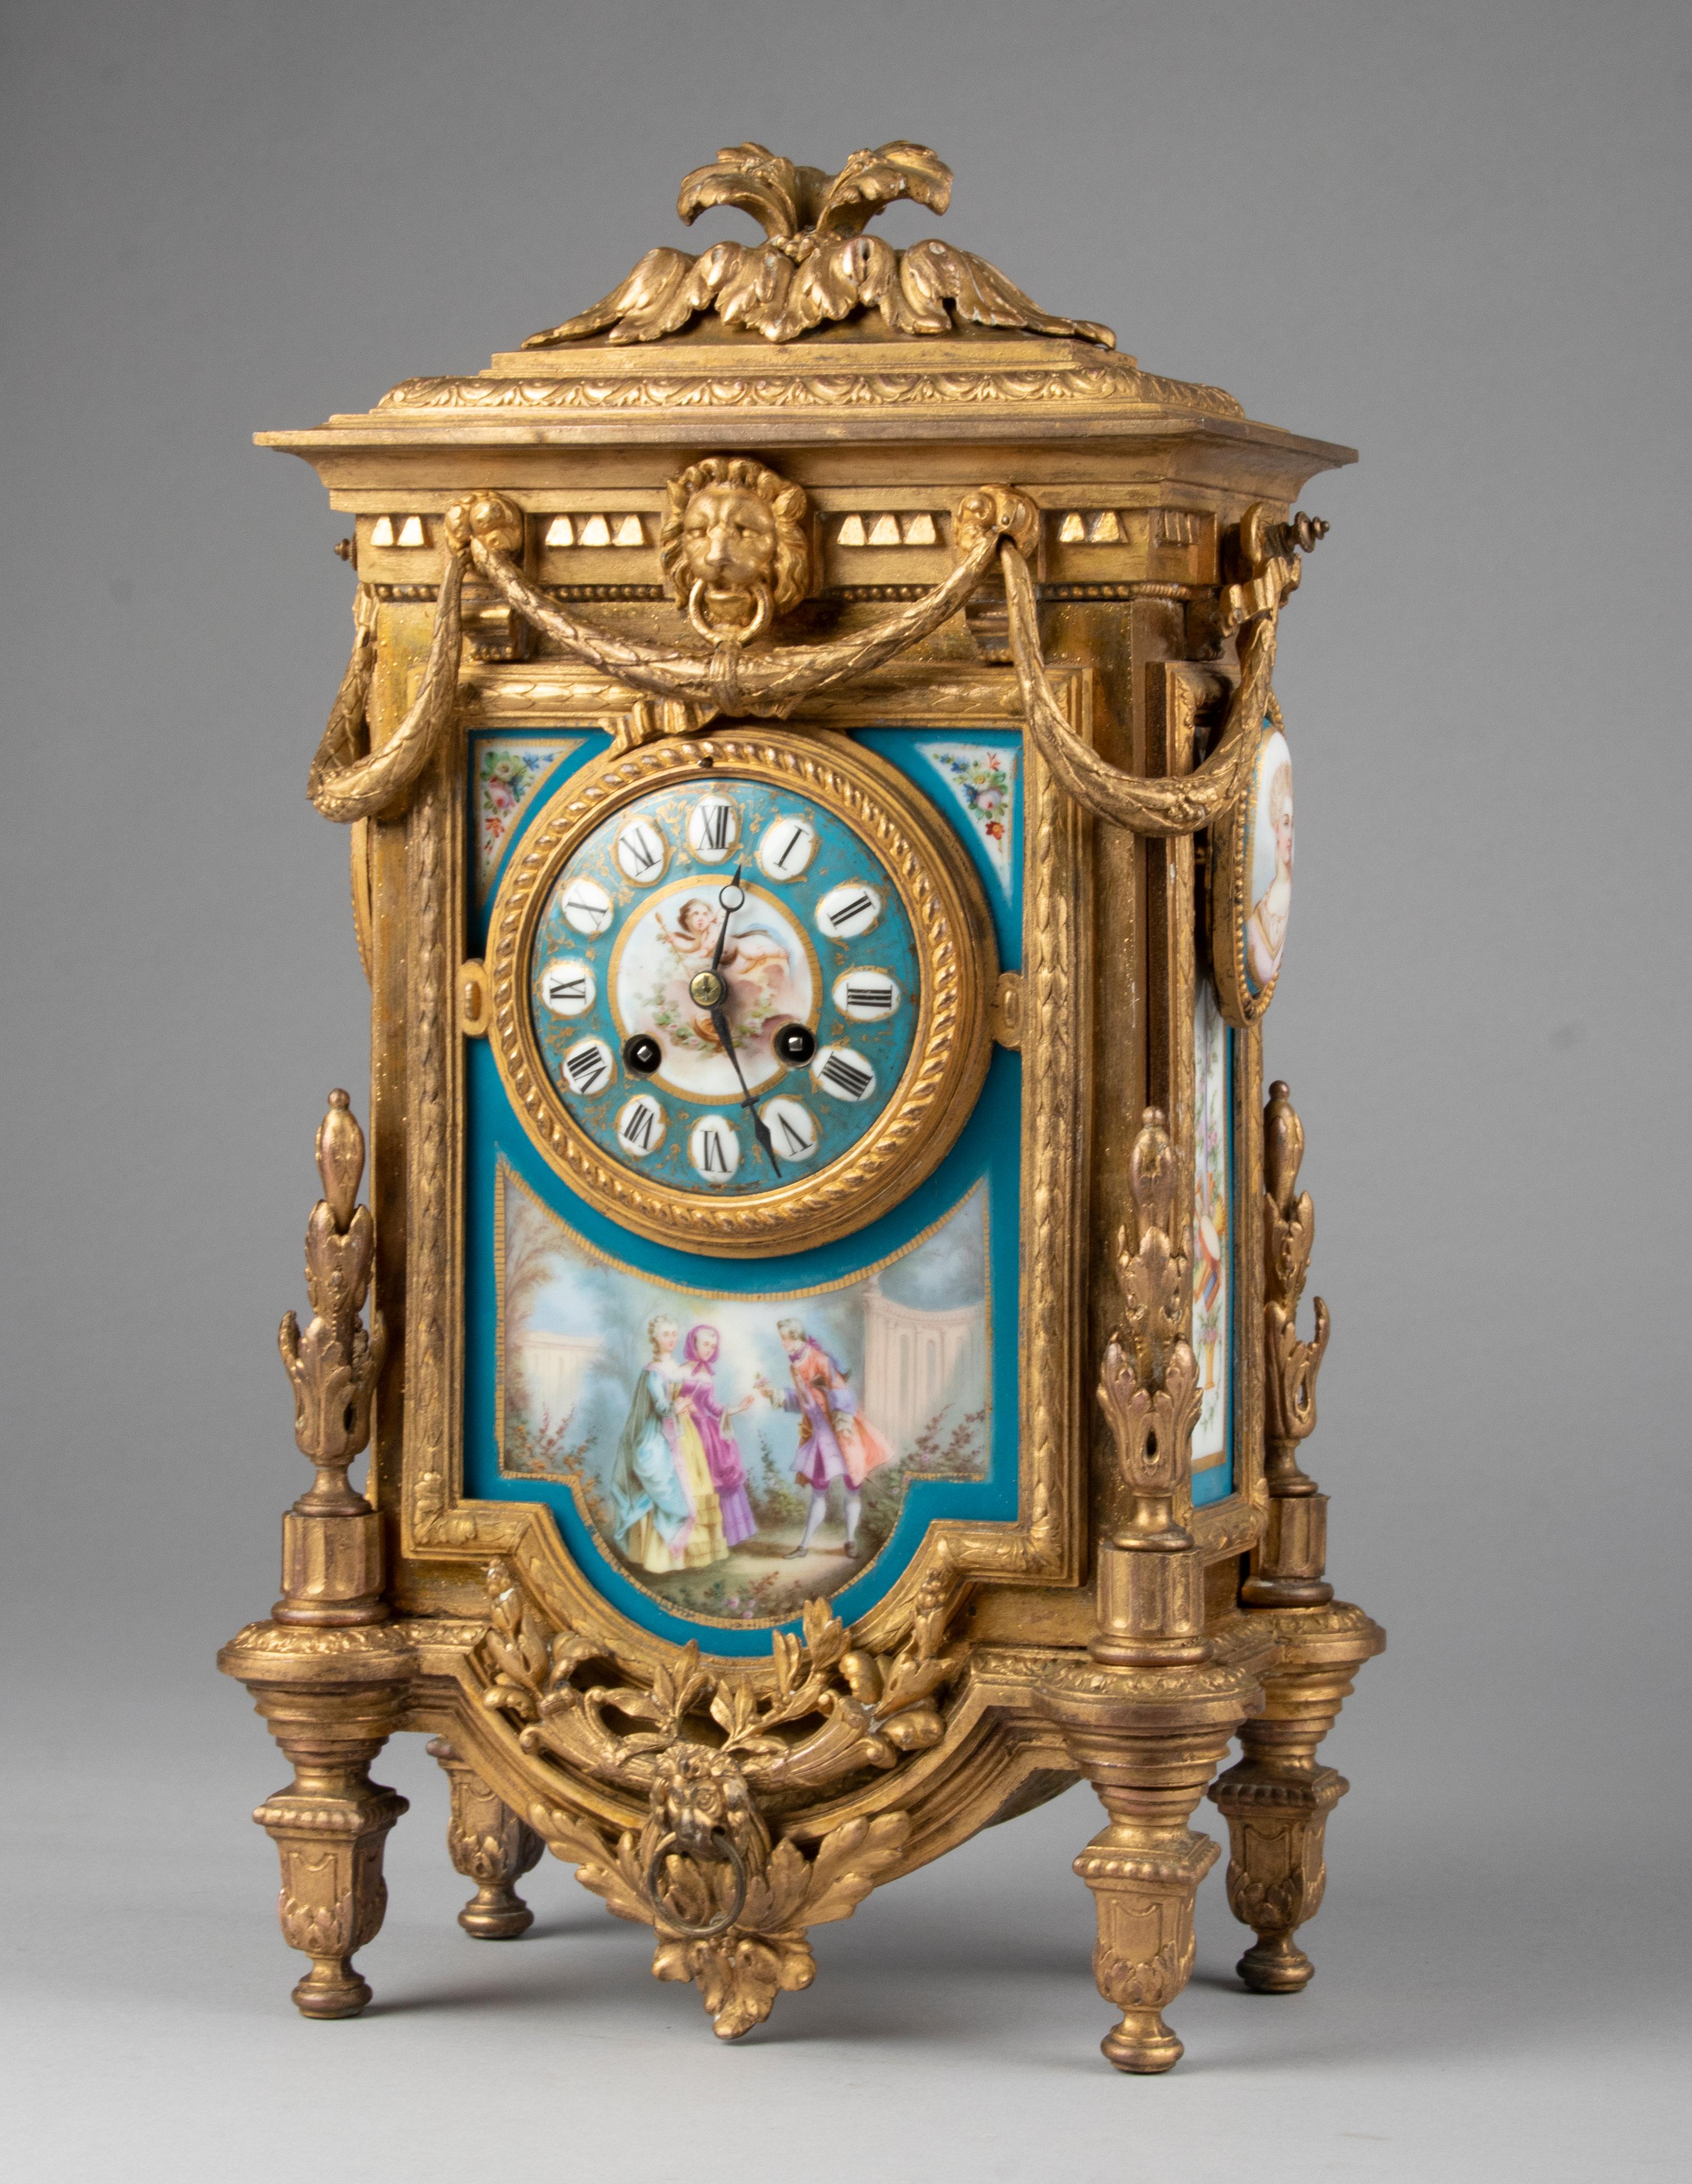 A Louis XVI style French mantel clock, with Sèvres Porcelain panels. The clock is made of casted spelter (zinc alloy) and has a gilt finish. On each side a porcelain portrait of Queen Marie-Antoinette her favorite sister and Maria Carolina. Made in